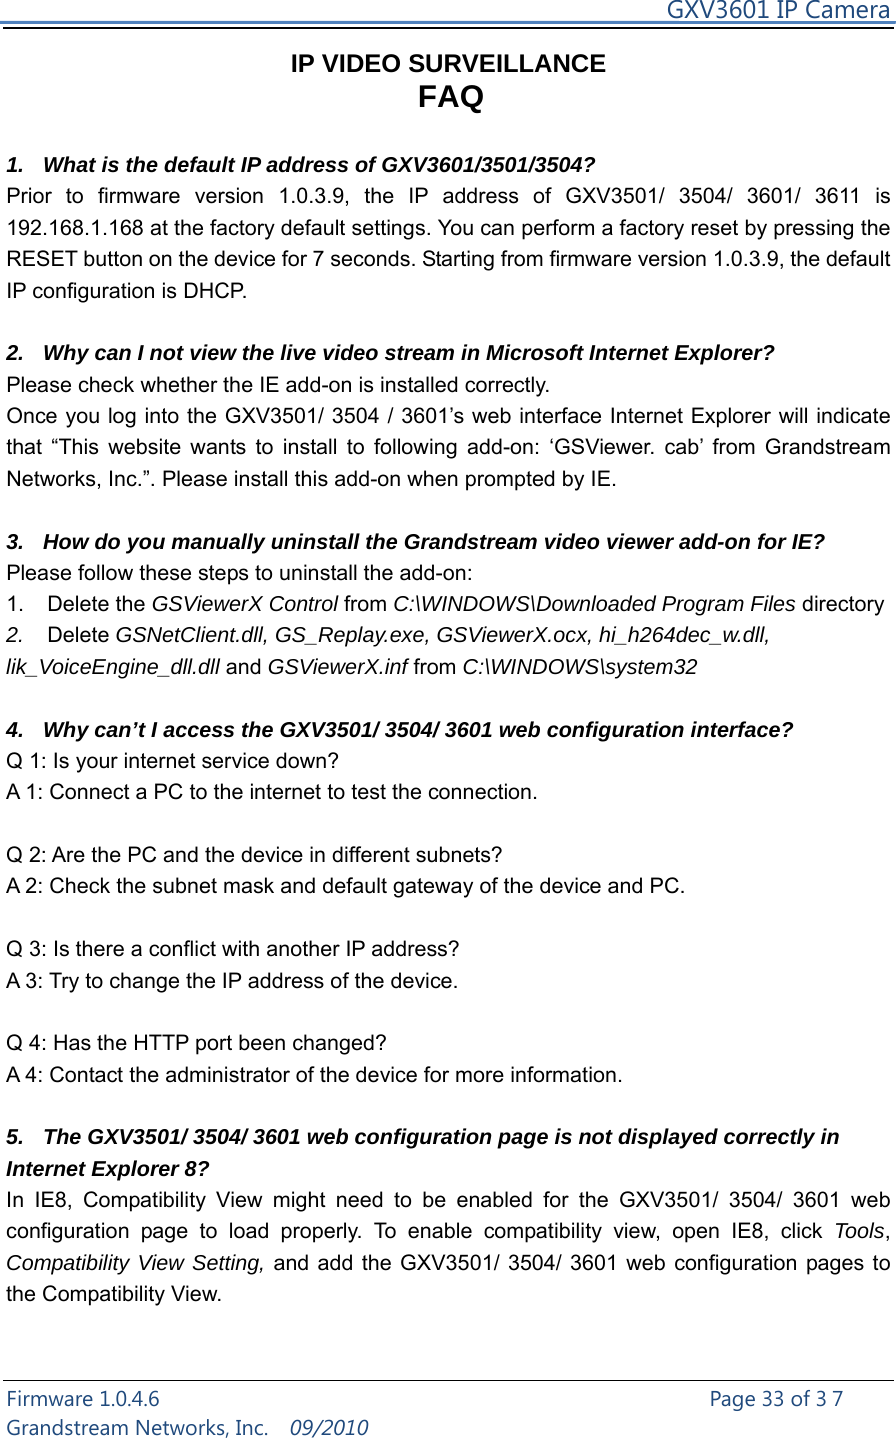     GXV3601 IP Camera Firmware 1.0.4.6                                                   Page 33 of 37     Grandstream Networks, Inc.  09/2010  IP VIDEO SURVEILLANCE FAQ  1.  What is the default IP address of GXV3601/3501/3504? Prior to firmware version 1.0.3.9, the IP address of GXV3501/ 3504/ 3601/ 3611 is 192.168.1.168 at the factory default settings. You can perform a factory reset by pressing the RESET button on the device for 7 seconds. Starting from firmware version 1.0.3.9, the default IP configuration is DHCP.  2.  Why can I not view the live video stream in Microsoft Internet Explorer? Please check whether the IE add-on is installed correctly.   Once you log into the GXV3501/ 3504 / 3601’s web interface Internet Explorer will indicate that “This website wants to install to following add-on: ‘GSViewer. cab’ from Grandstream Networks, Inc.”. Please install this add-on when prompted by IE.  3.  How do you manually uninstall the Grandstream video viewer add-on for IE?   Please follow these steps to uninstall the add-on:   1. Delete the GSViewerX Control from C:\WINDOWS\Downloaded Program Files directory   2.  Delete GSNetClient.dll, GS_Replay.exe, GSViewerX.ocx, hi_h264dec_w.dll, lik_VoiceEngine_dll.dll and GSViewerX.inf from C:\WINDOWS\system32  4.  Why can’t I access the GXV3501/ 3504/ 3601 web configuration interface?   Q 1: Is your internet service down?   A 1: Connect a PC to the internet to test the connection.  Q 2: Are the PC and the device in different subnets?   A 2: Check the subnet mask and default gateway of the device and PC.  Q 3: Is there a conflict with another IP address?   A 3: Try to change the IP address of the device.    Q 4: Has the HTTP port been changed?   A 4: Contact the administrator of the device for more information.  5.  The GXV3501/ 3504/ 3601 web configuration page is not displayed correctly in Internet Explorer 8? In IE8, Compatibility View might need to be enabled for the GXV3501/ 3504/ 3601 web configuration page to load properly. To enable compatibility view, open IE8, click Tools, Compatibility View Setting, and add the GXV3501/ 3504/ 3601 web configuration pages to the Compatibility View.    